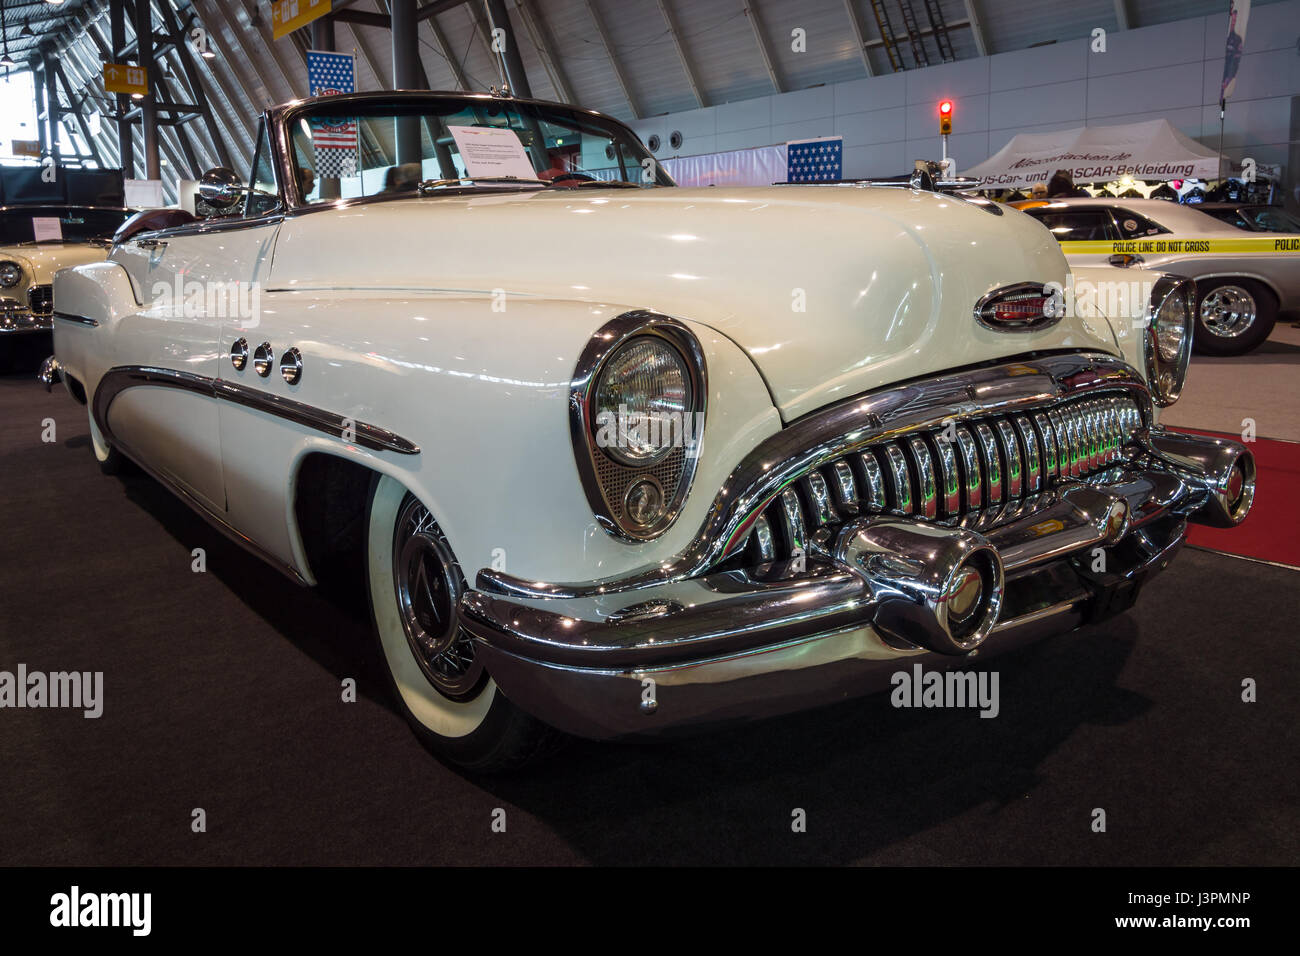 STUTTGART, GERMANY - MARCH 03, 2017: Full-size car Buick Super Convertible, 1953. Europe's greatest classic car exhibition 'RETRO CLASSICS' Stock Photo